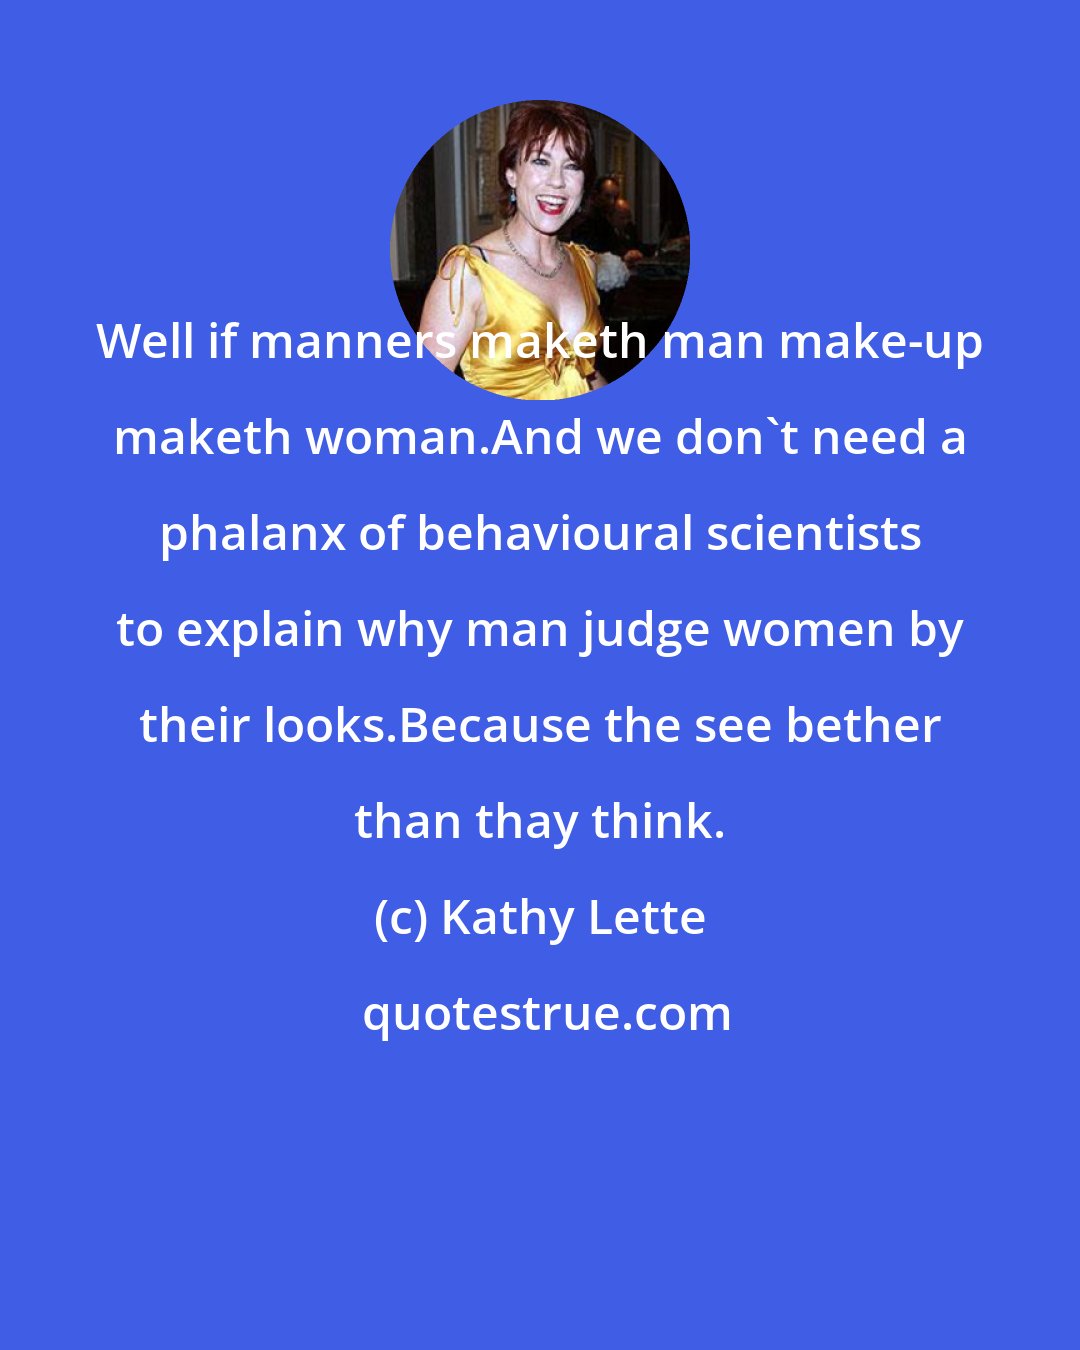 Kathy Lette: Well if manners maketh man make-up maketh woman.And we don't need a phalanx of behavioural scientists to explain why man judge women by their looks.Because the see bether than thay think.